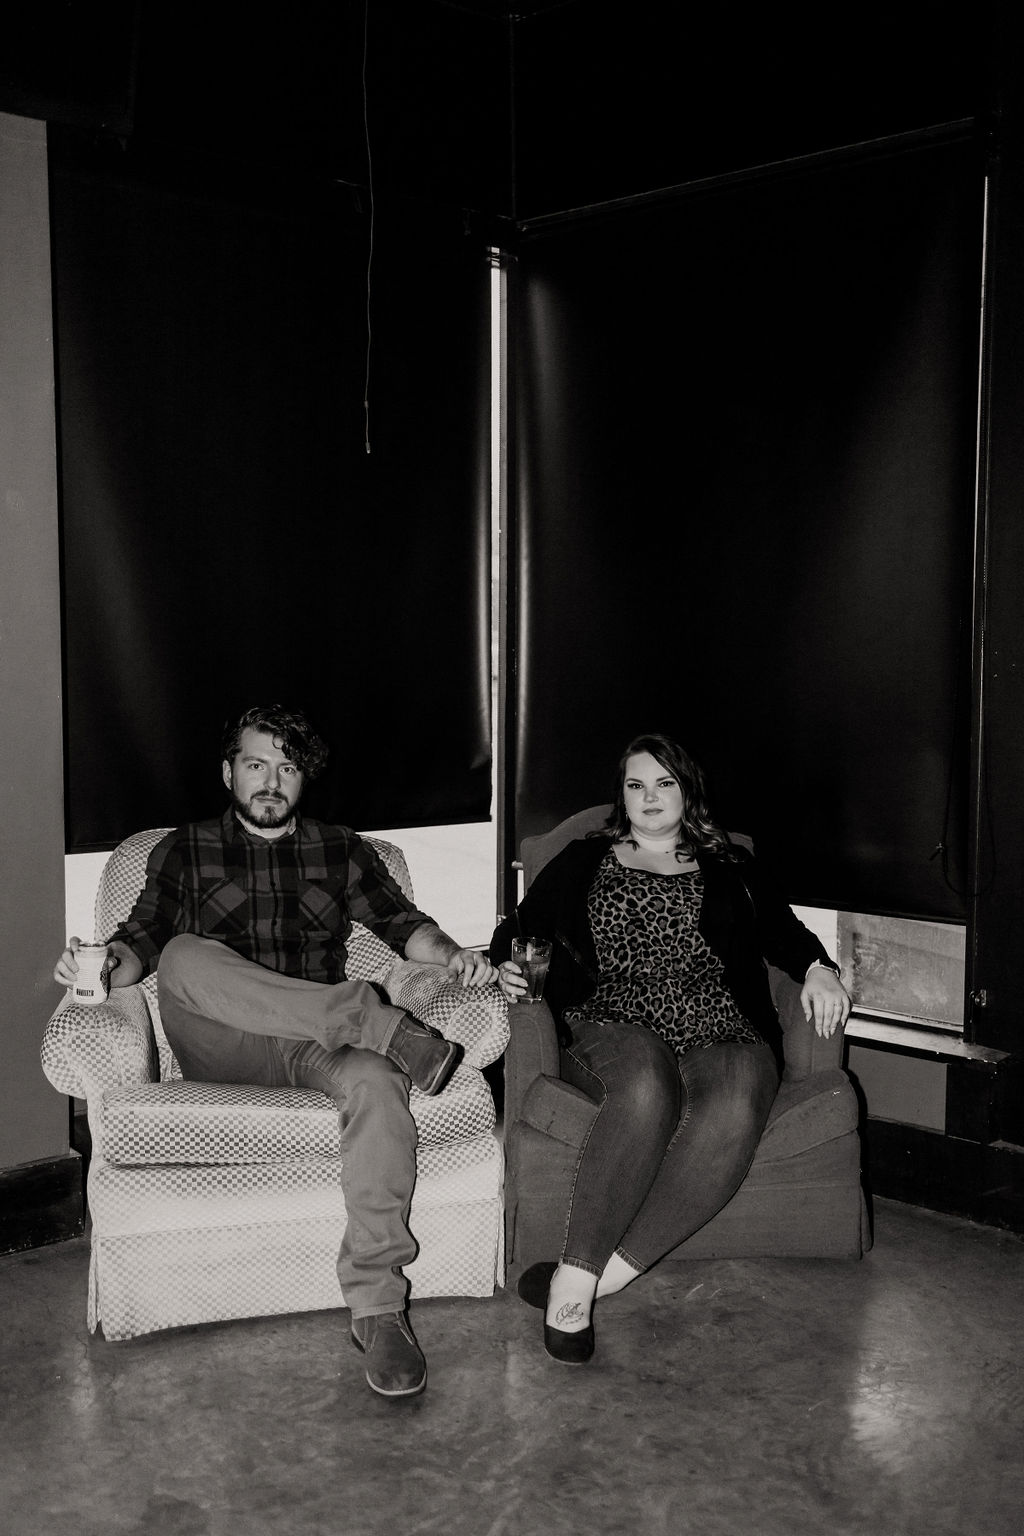 engaged couple during engagement session at arcade bar in northside outside of downtown cincinnati, ohio